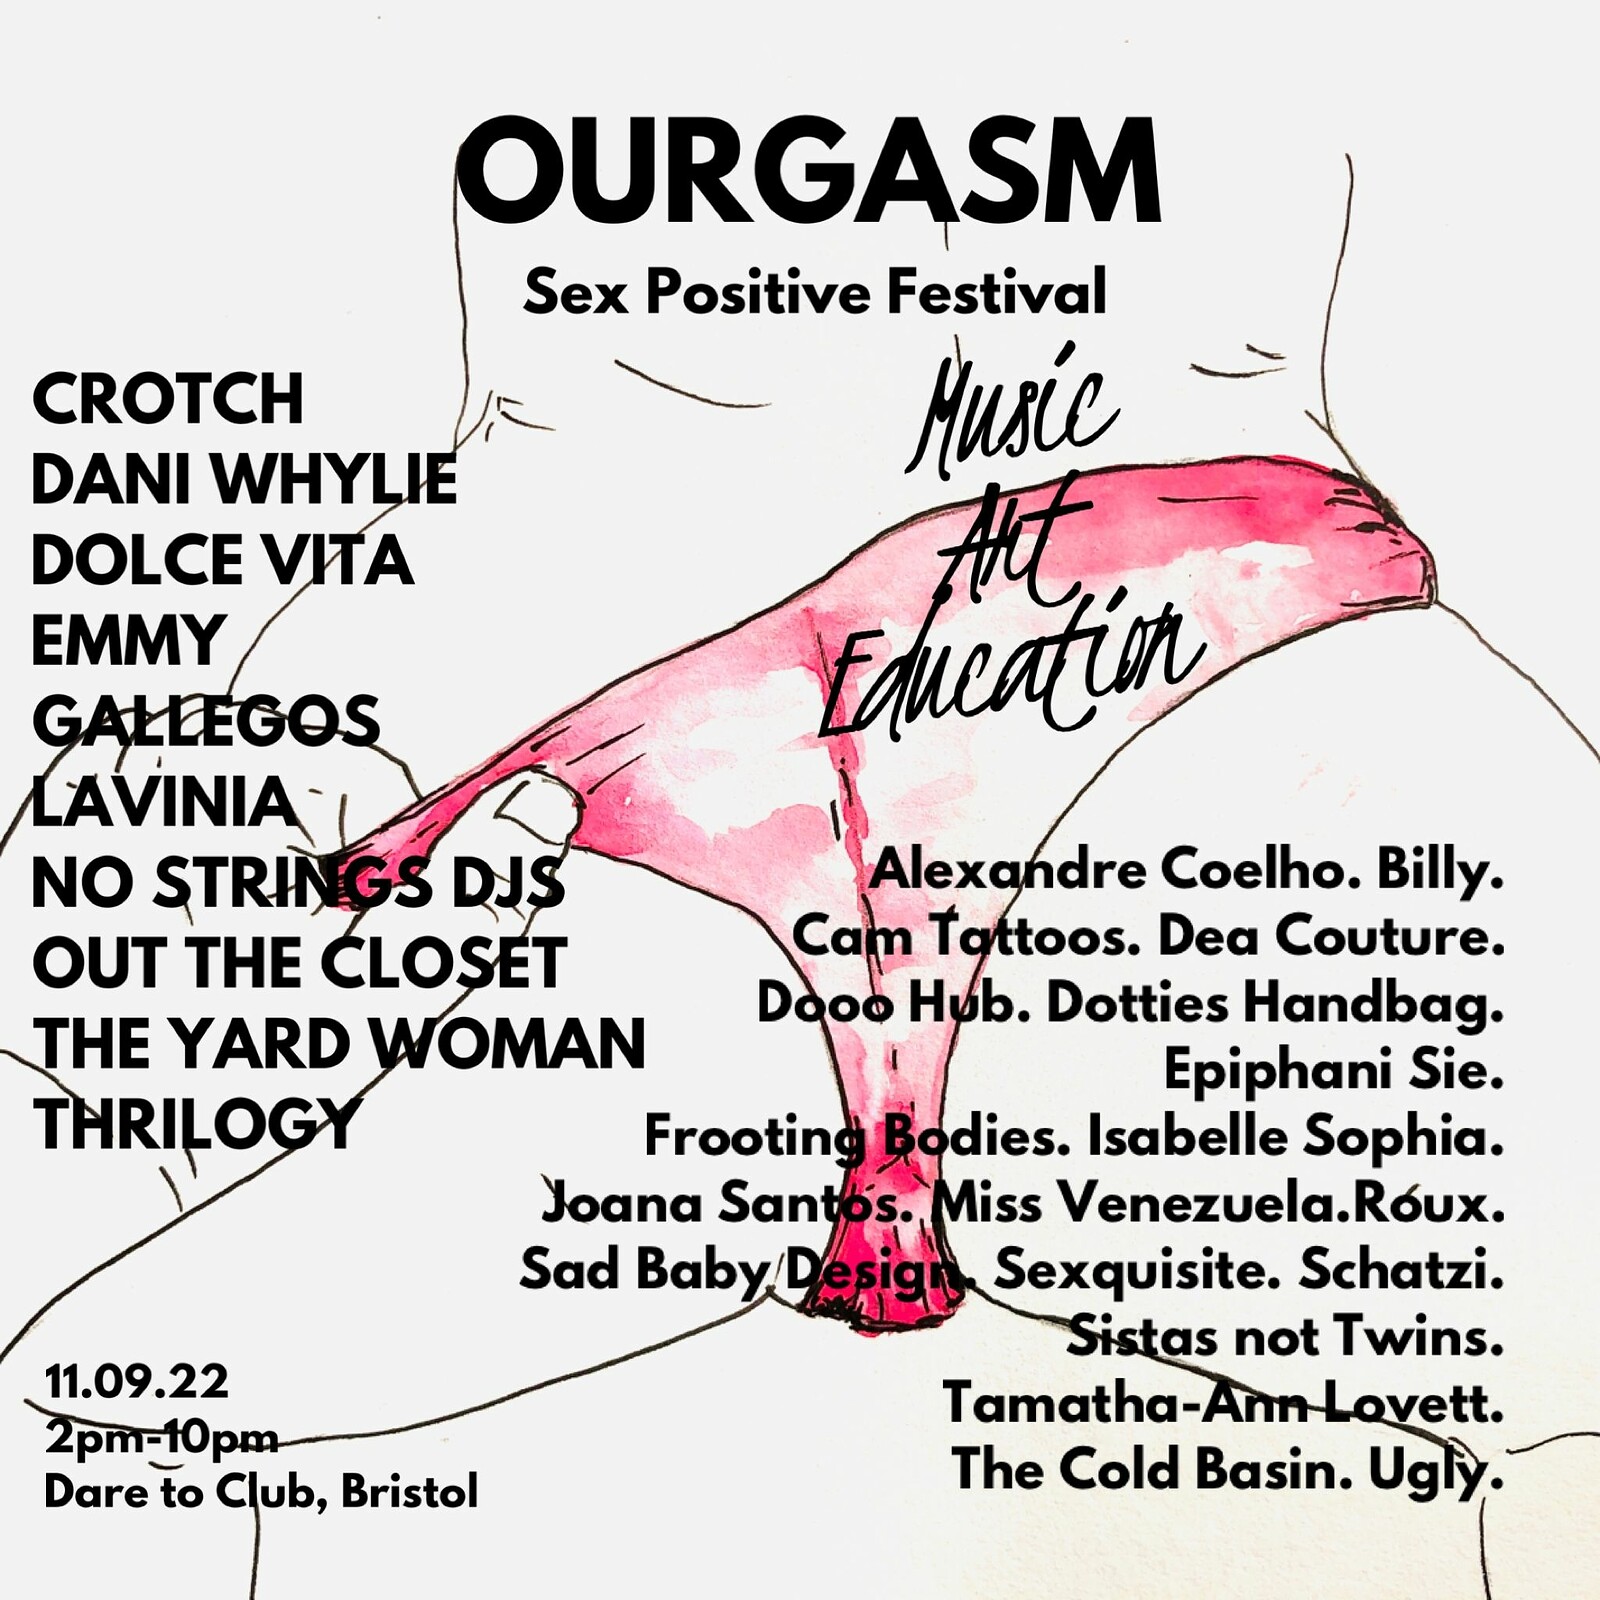 OURGASM : SEX-POSITIVE FESTIVAL at Dare to Club